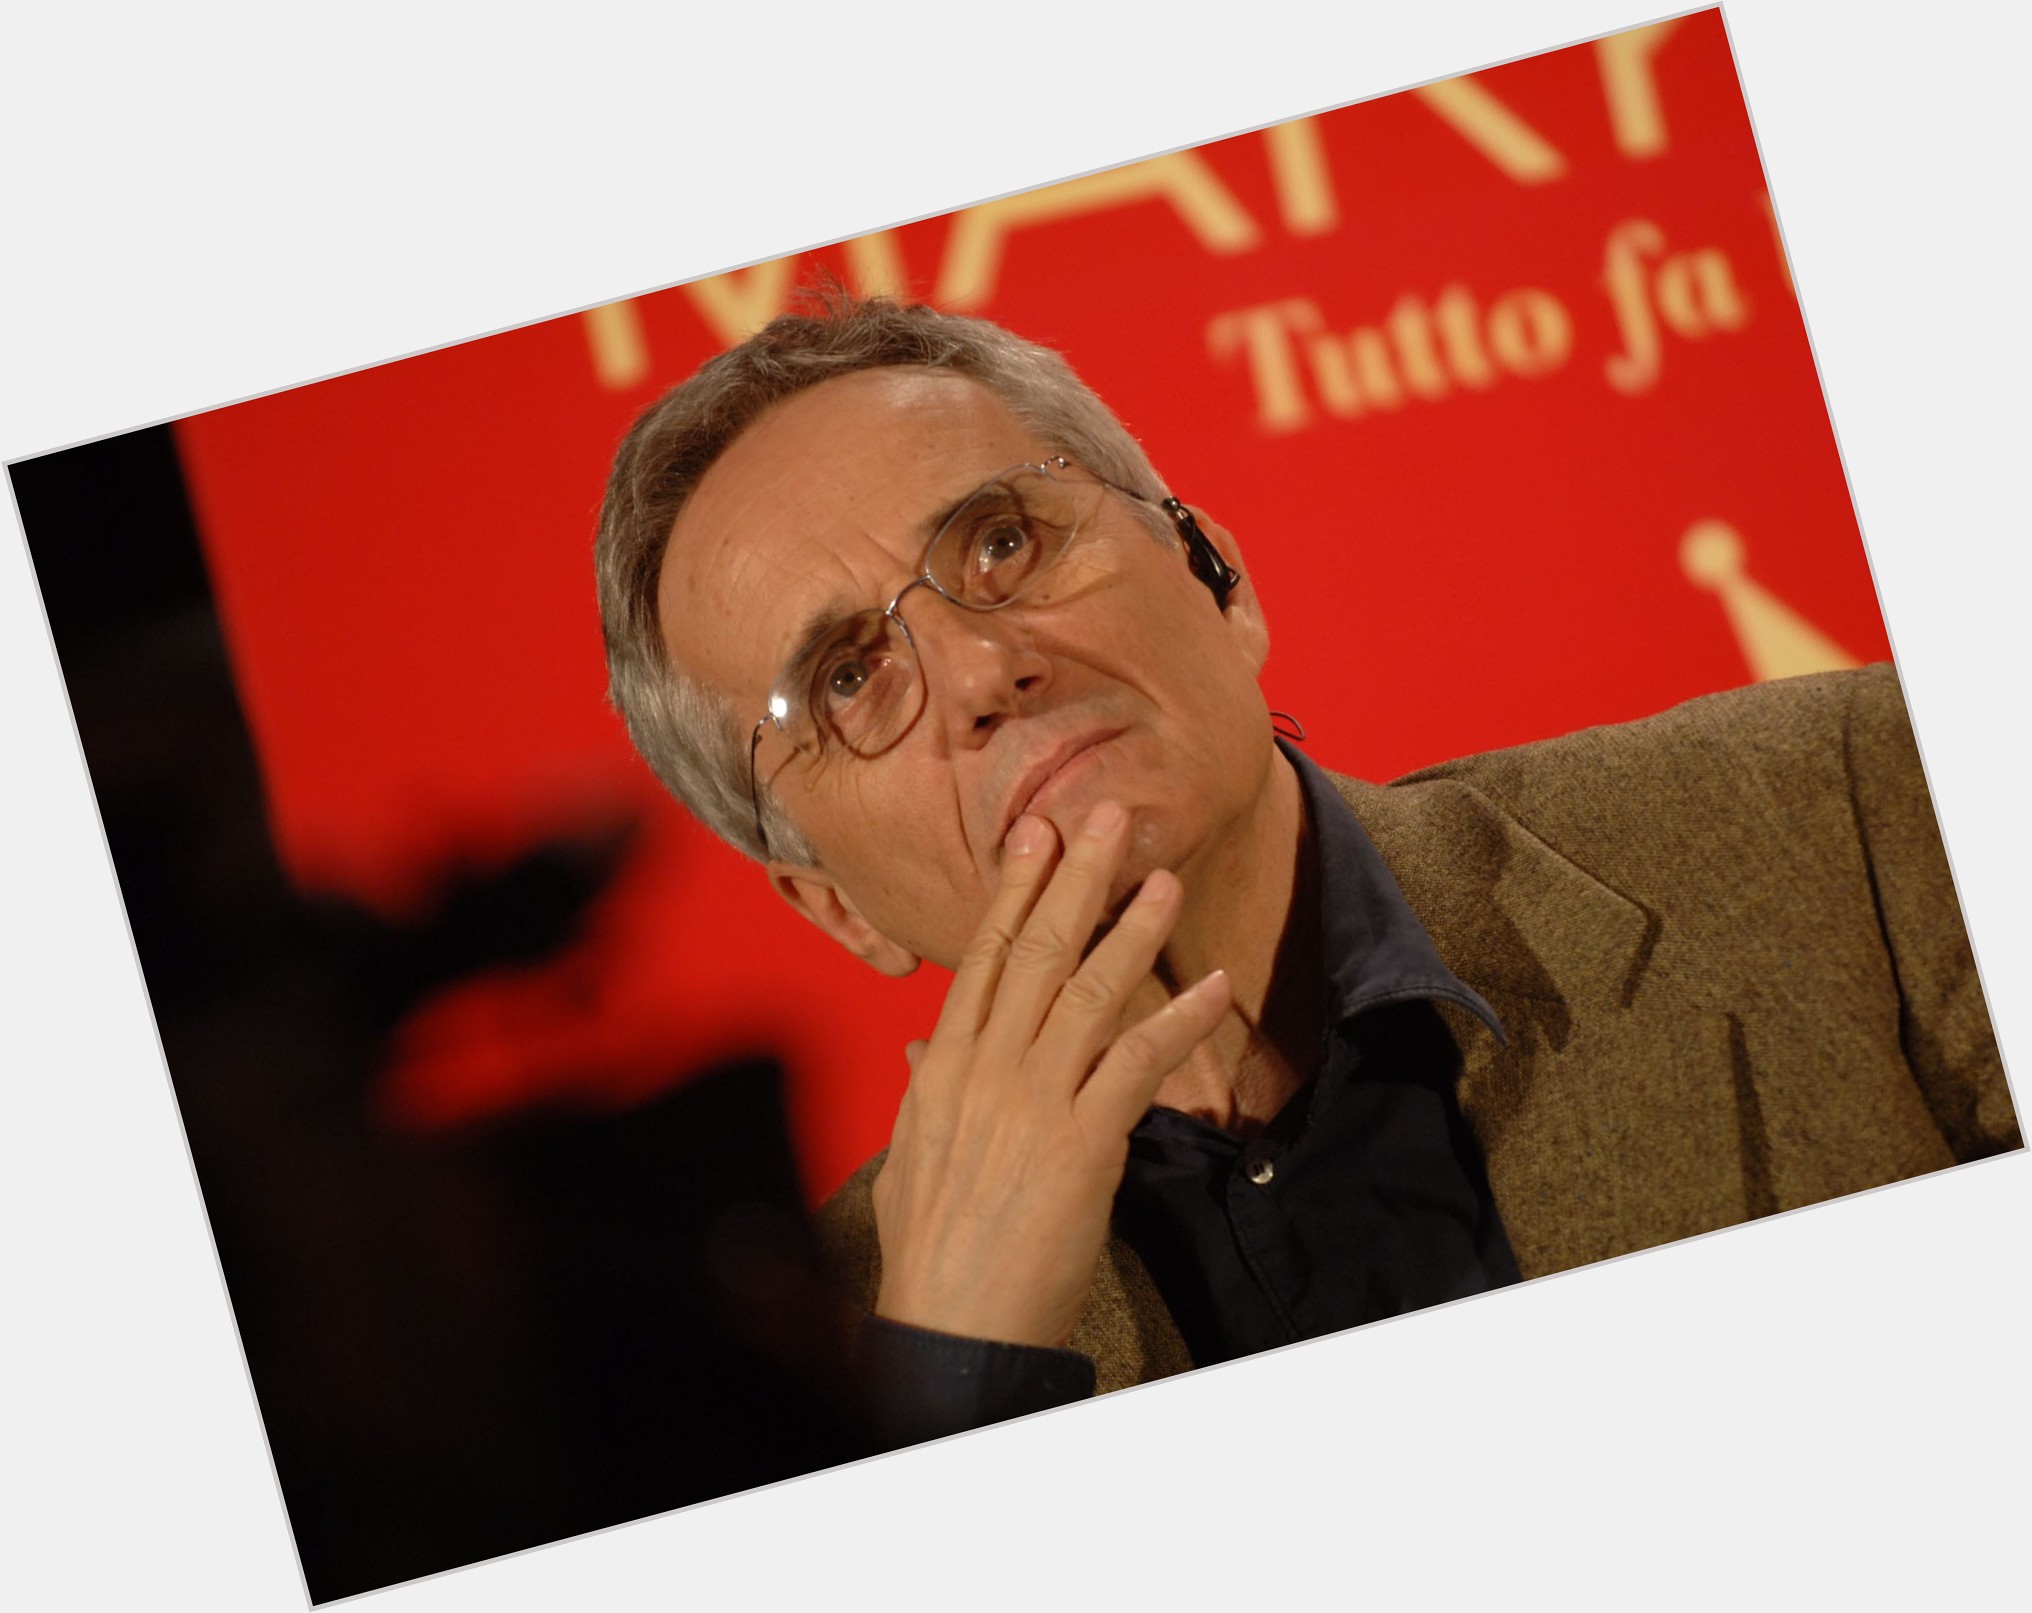 Marco Bellocchio hairstyle 3